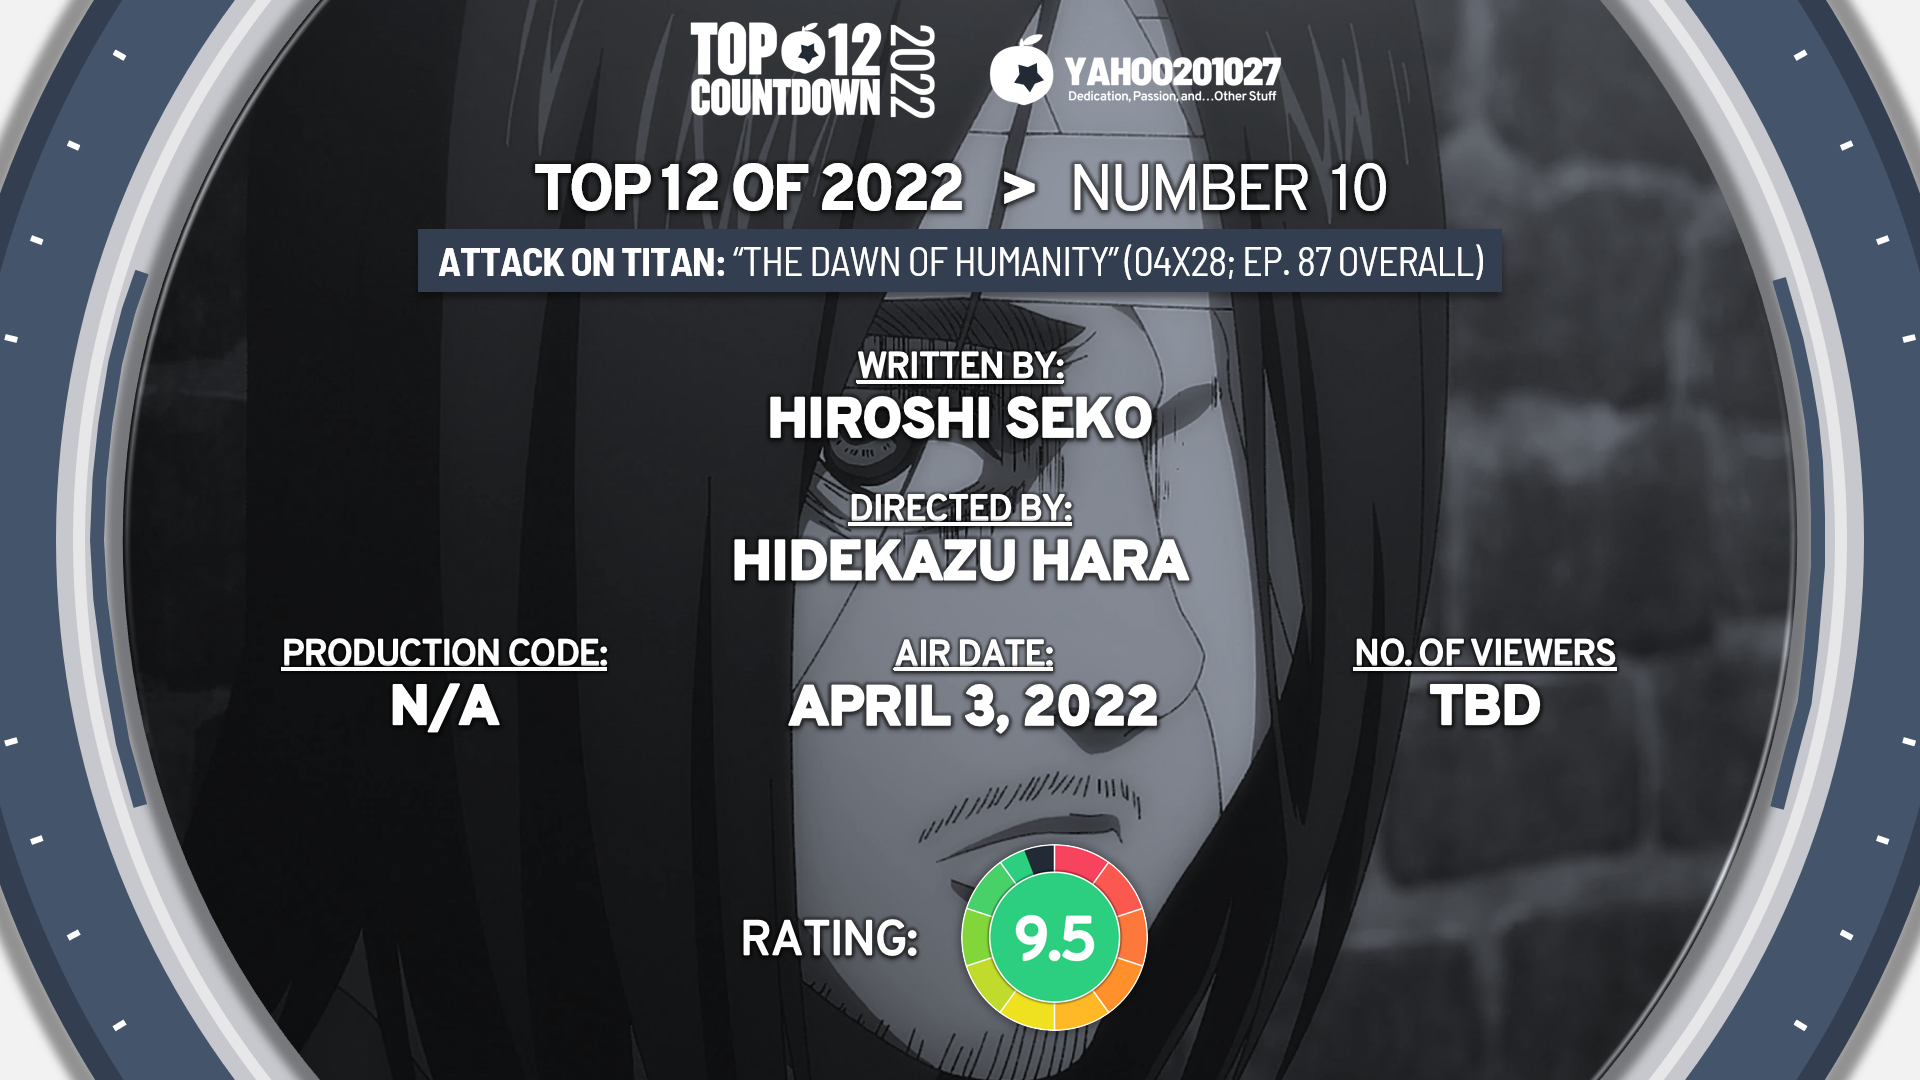 Number 10 of the Top 12 Countdown of 2022 – Attack on Titan 進撃の